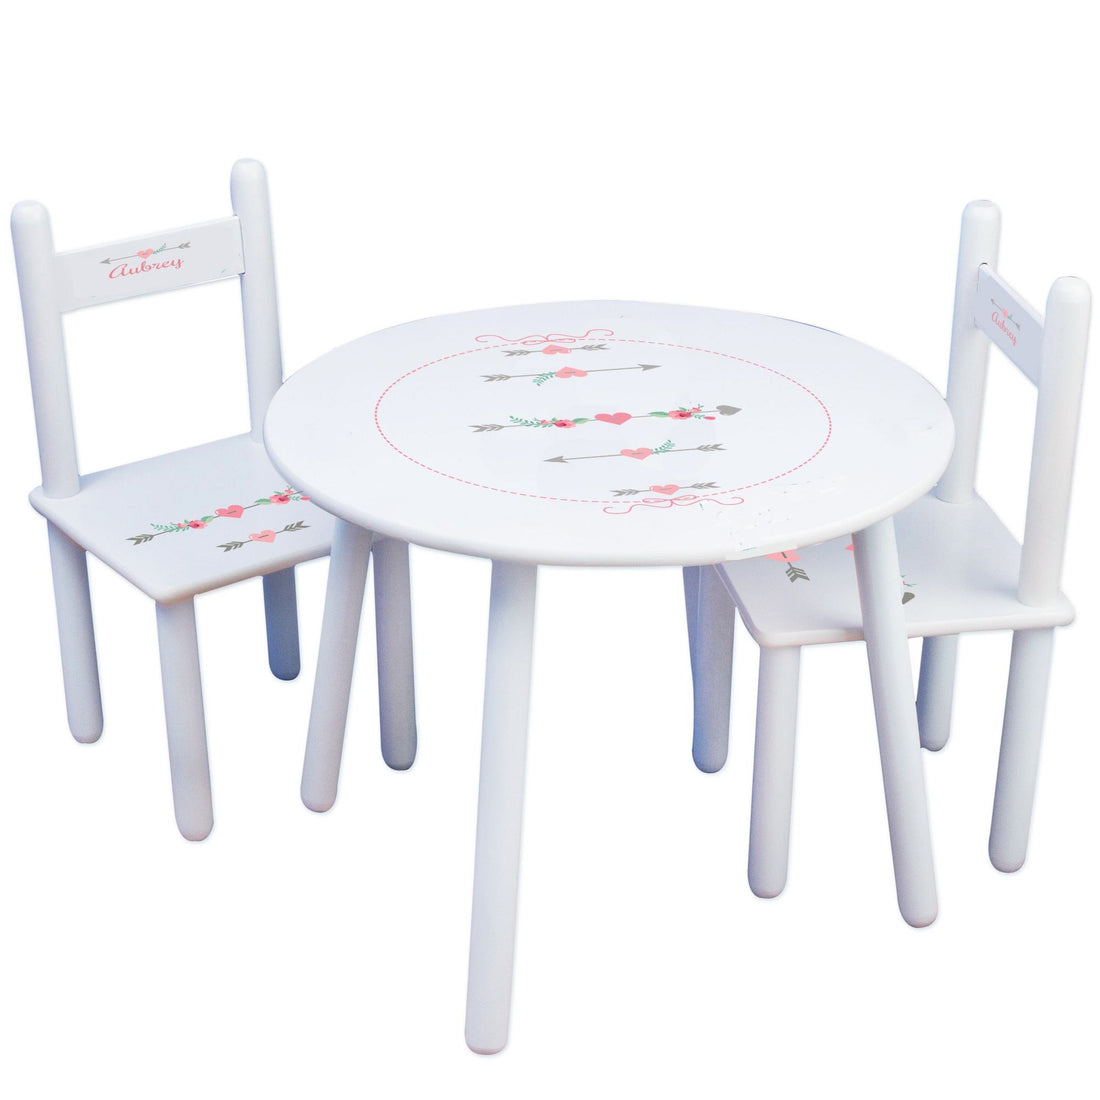 Personalized Table and Chairs with Girl Tribal Arrows design